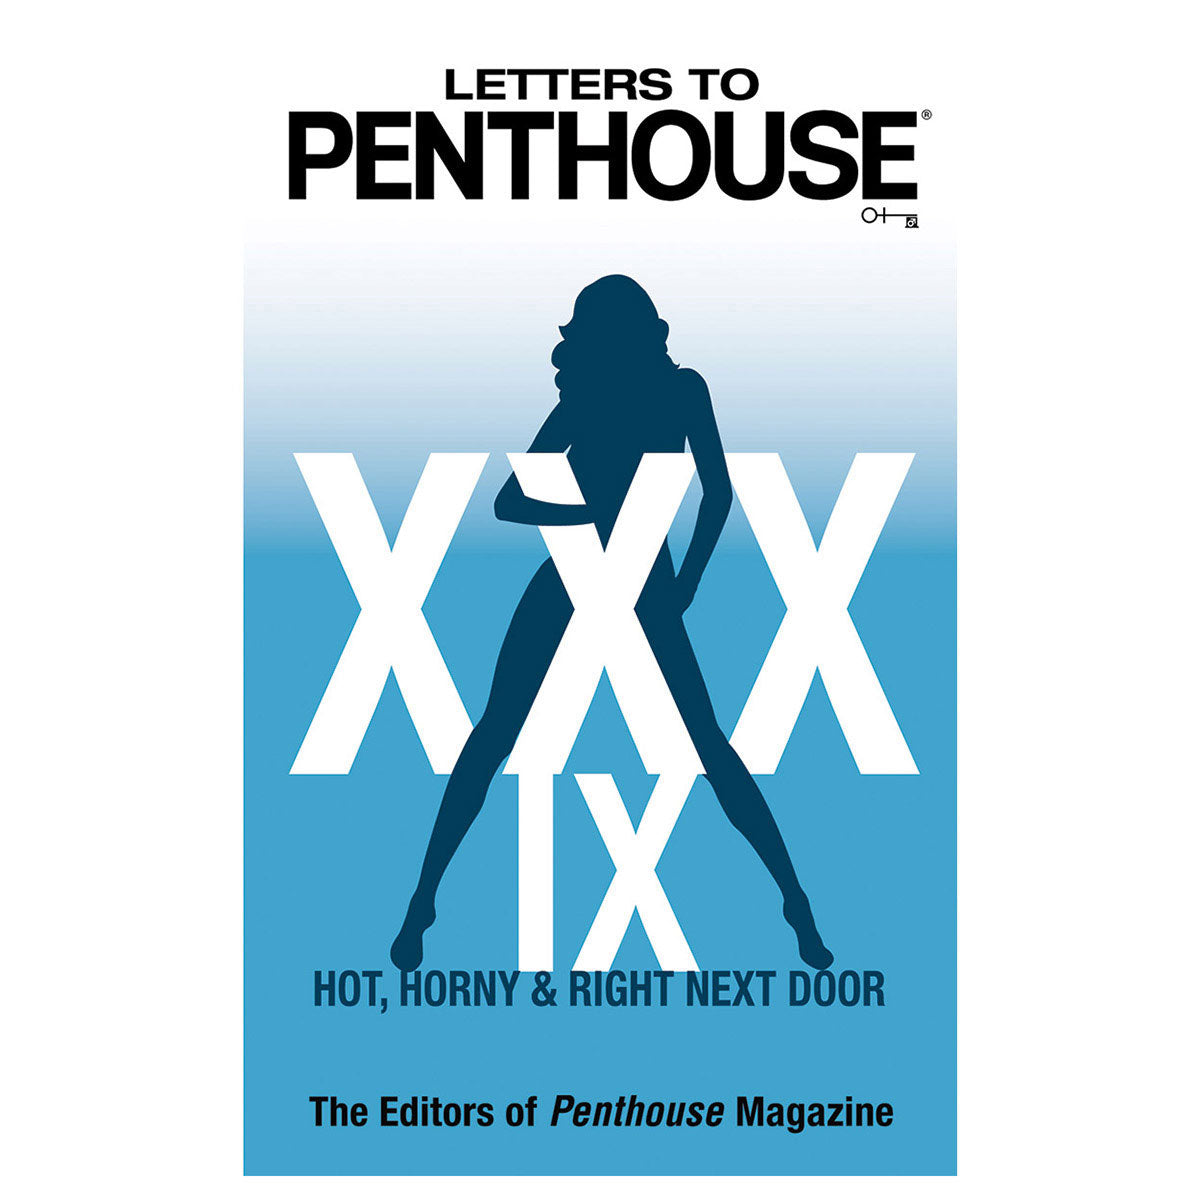 Letters to Penthouse XXXIX - Hot, Horny & Right Next Door - Grand Central Publishing